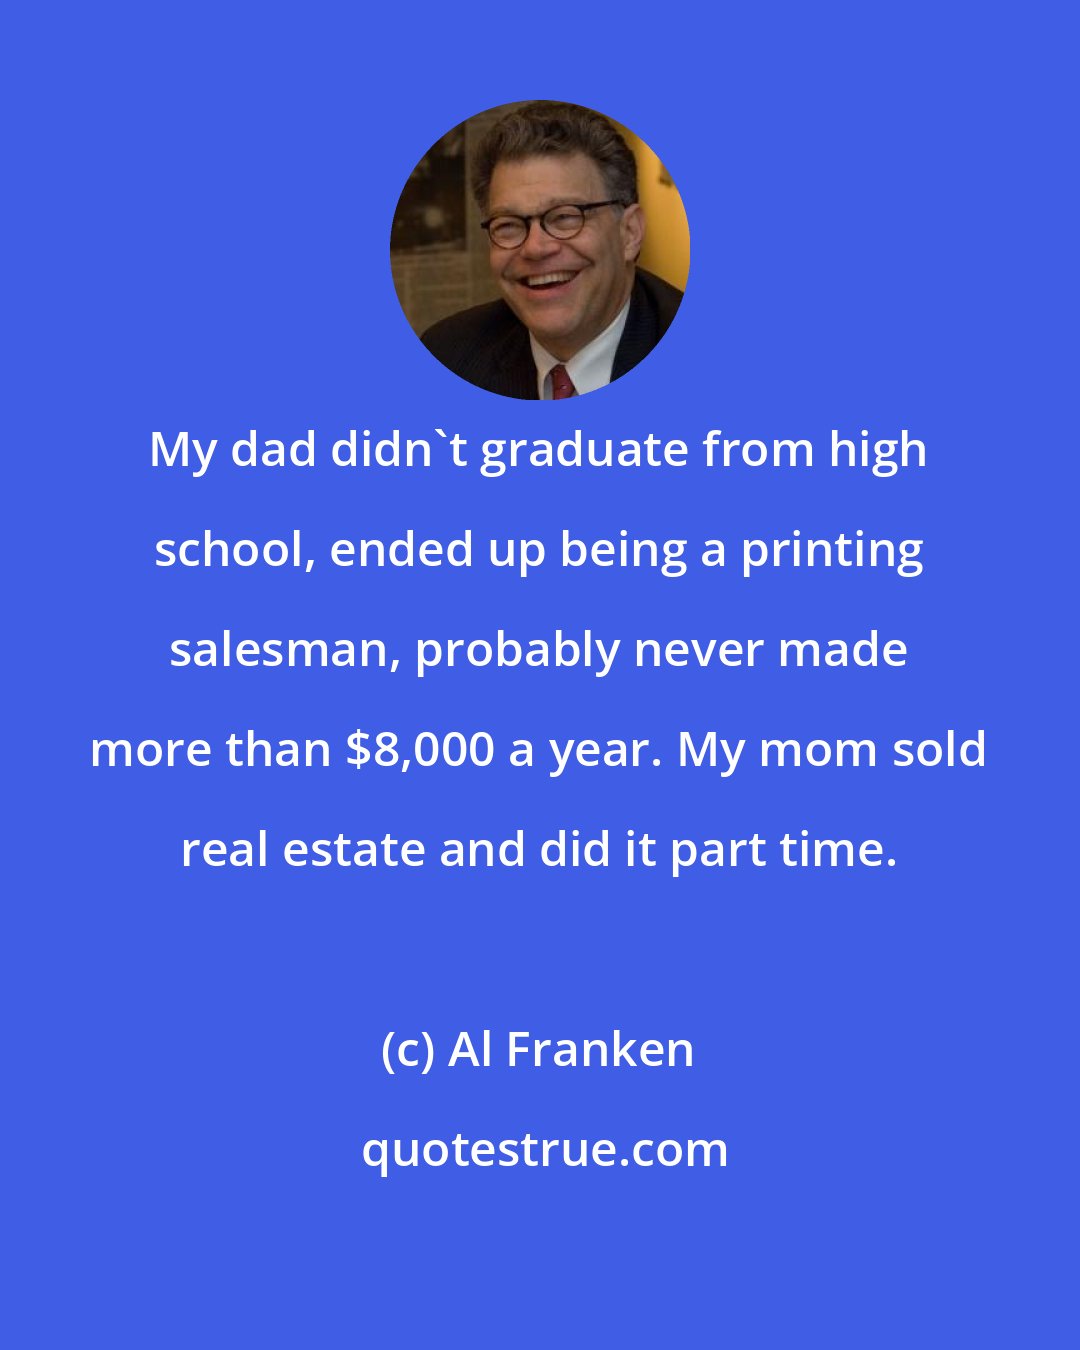 Al Franken: My dad didn't graduate from high school, ended up being a printing salesman, probably never made more than $8,000 a year. My mom sold real estate and did it part time.